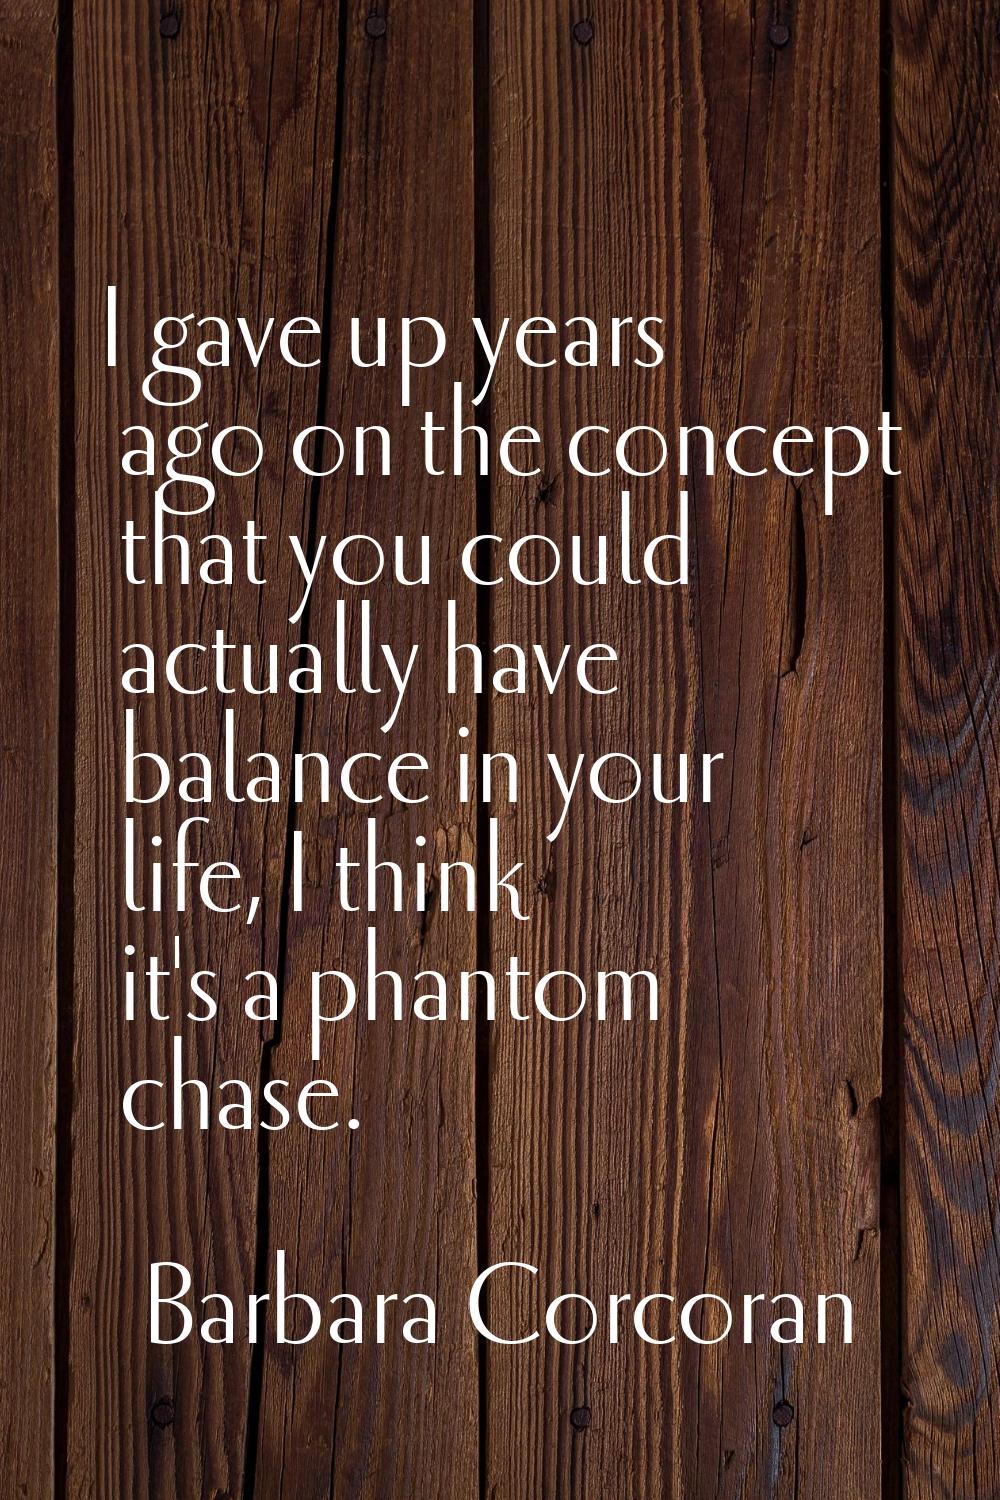 I gave up years ago on the concept that you could actually have balance in your life, I think it's 